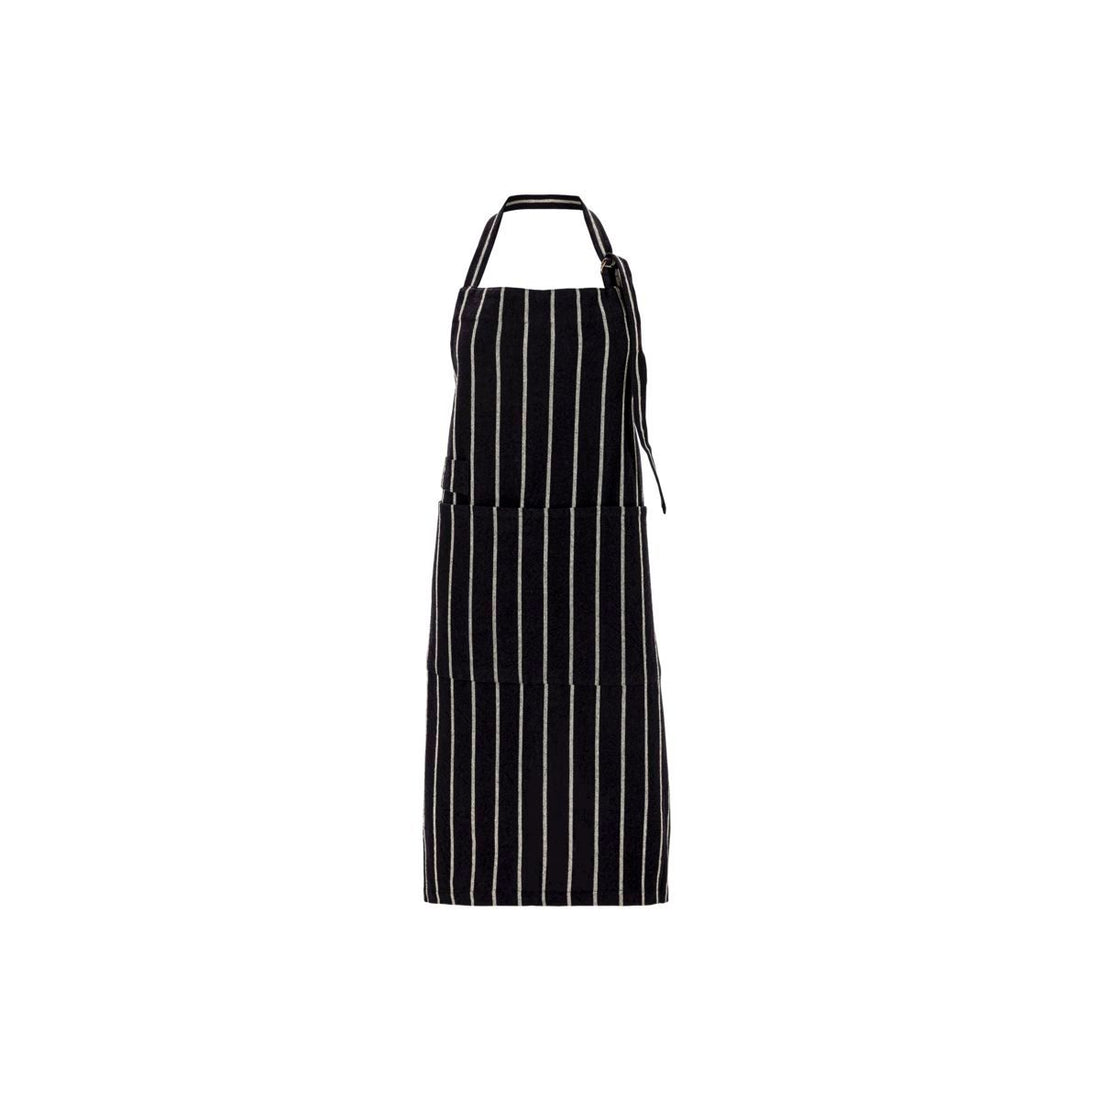 House Doctor apron, Chef, Black with White Stripes